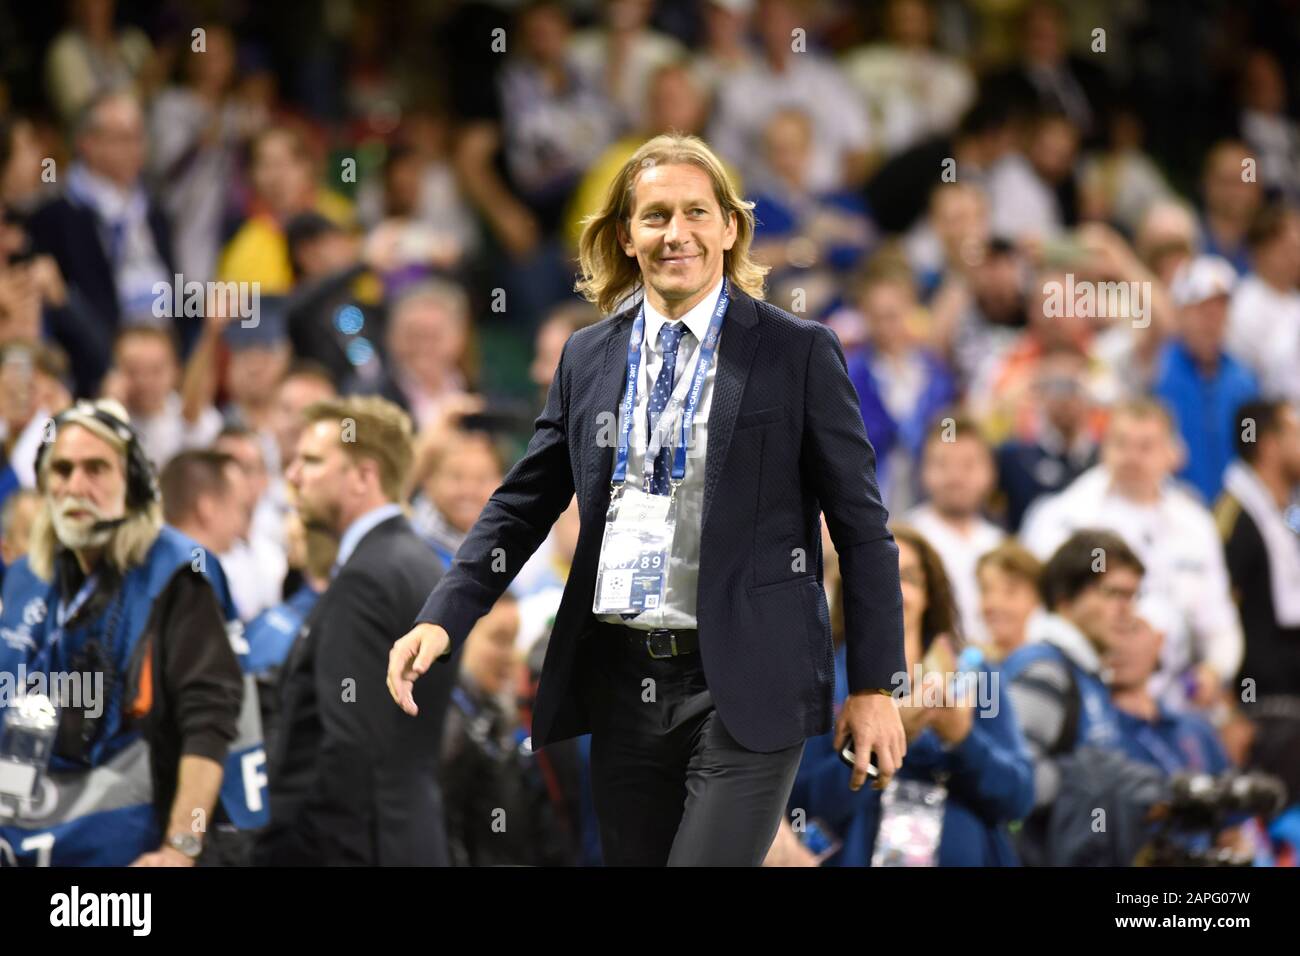 Former Real Madrid player Míchel Salgado at the UEFA Champions League Final between Juventus and Real Madrid CF at the National Stadium of Wales in Cardiff : Stock Photo